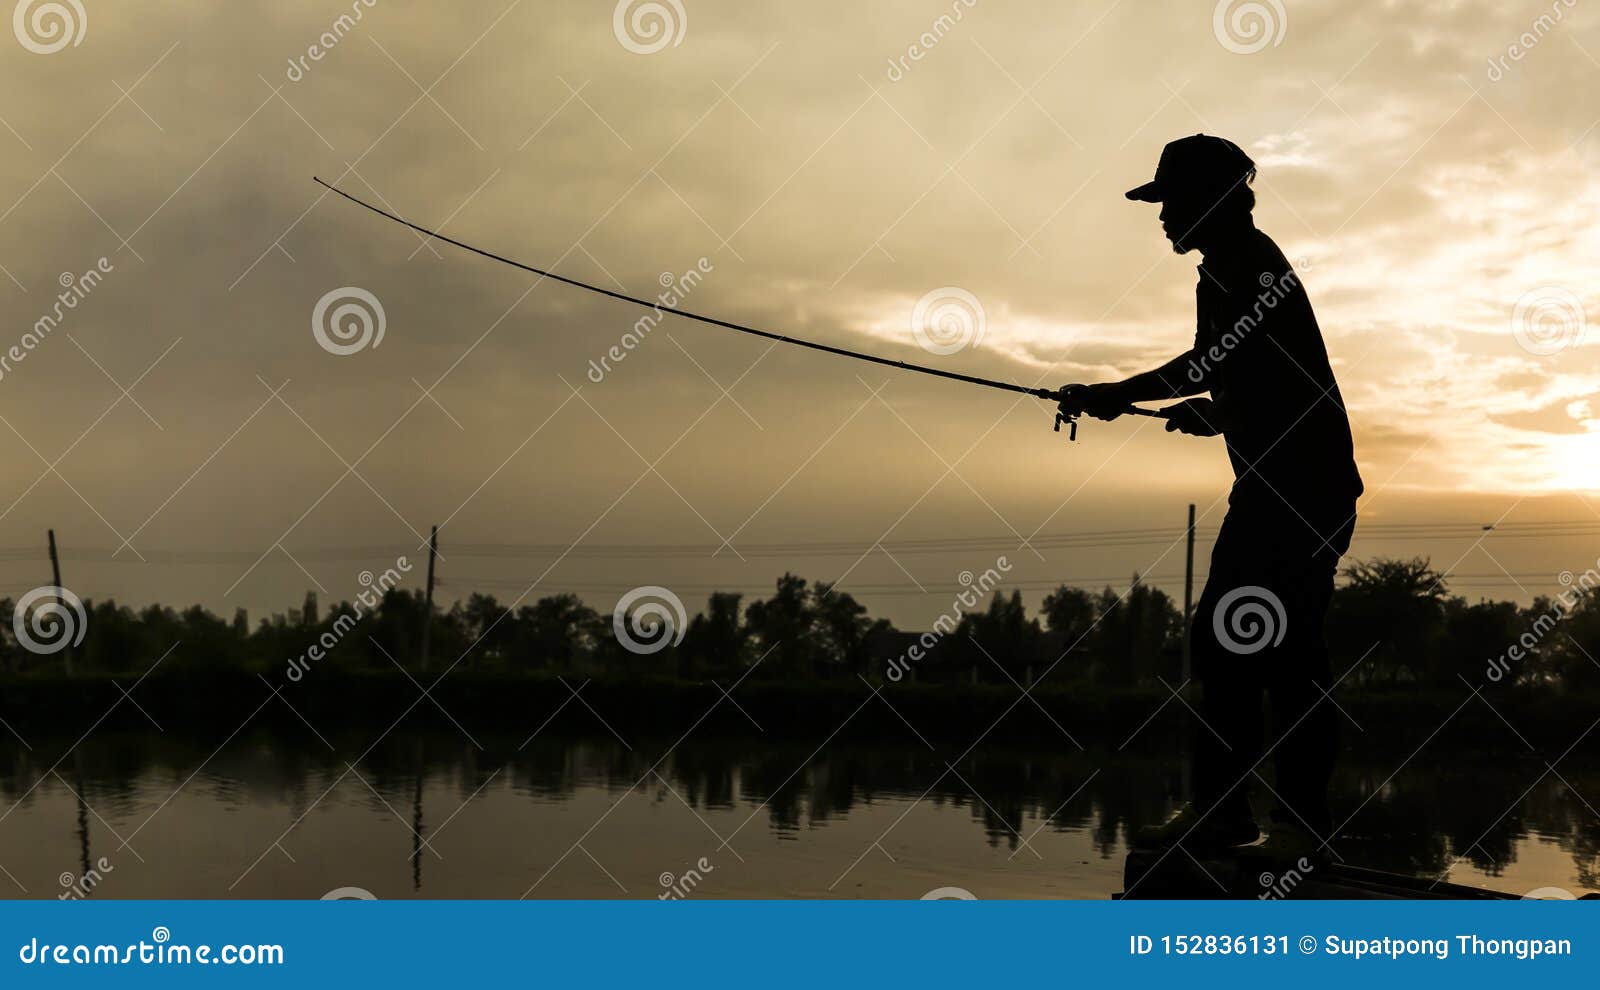 The Man Casting Fishing Rod Stock Image - Image of finesse